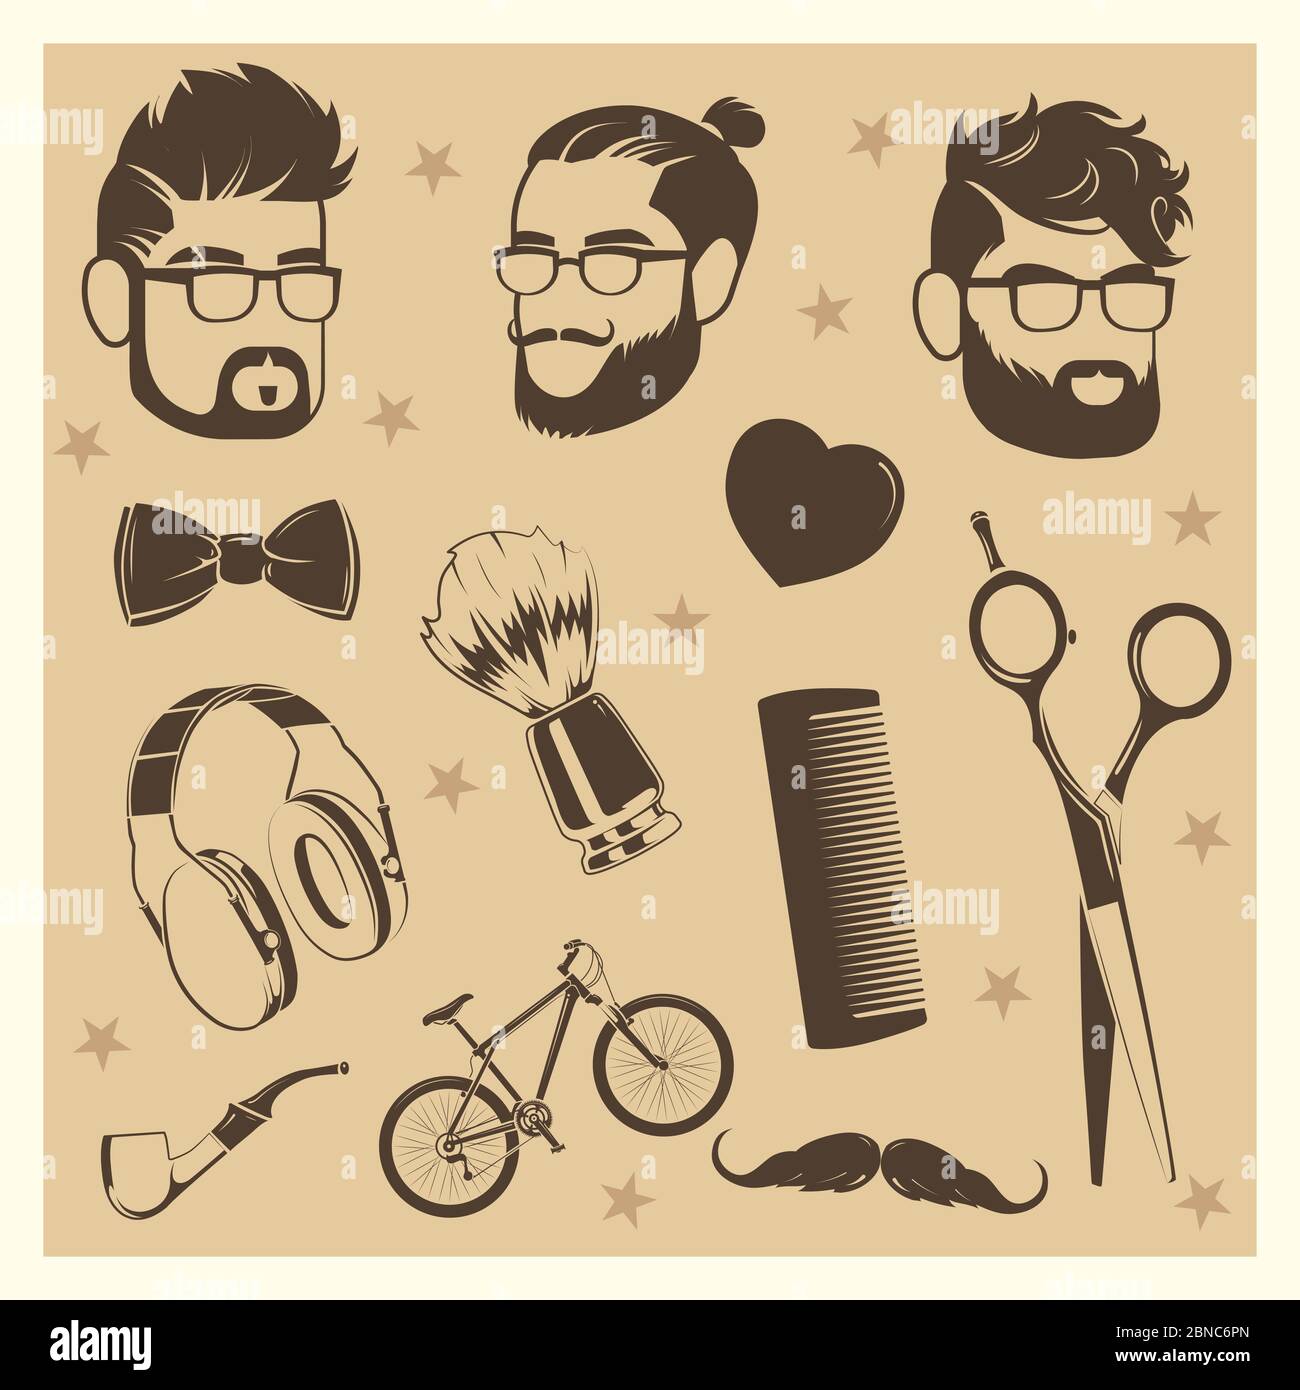 Vector hipster elements set - male heads, scissors, bow tie, bicycle illustration Stock Vector